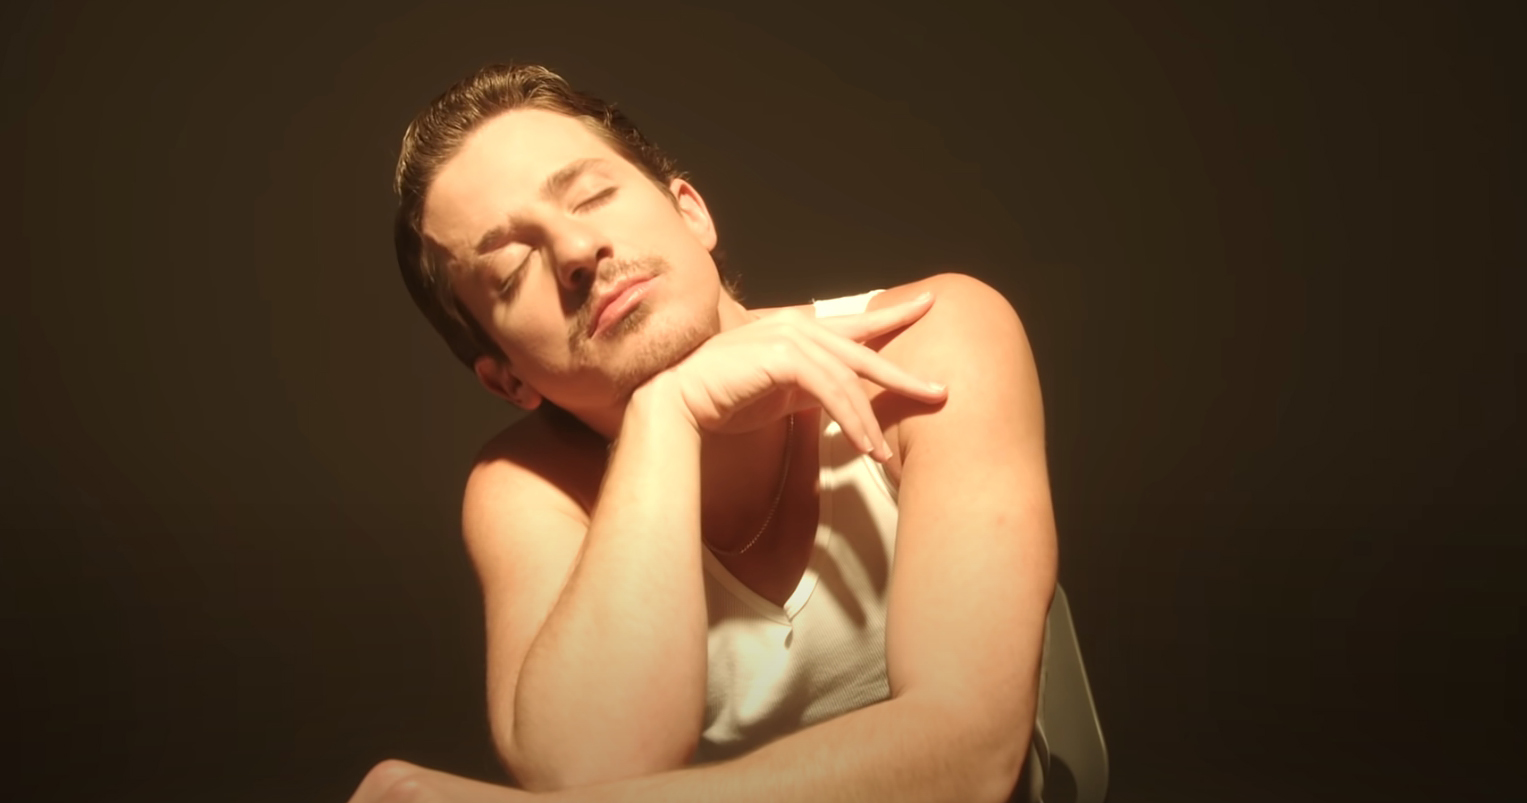 Charlie Puth shows off his nude chest in sensual music video ‘That’s Hilarious’